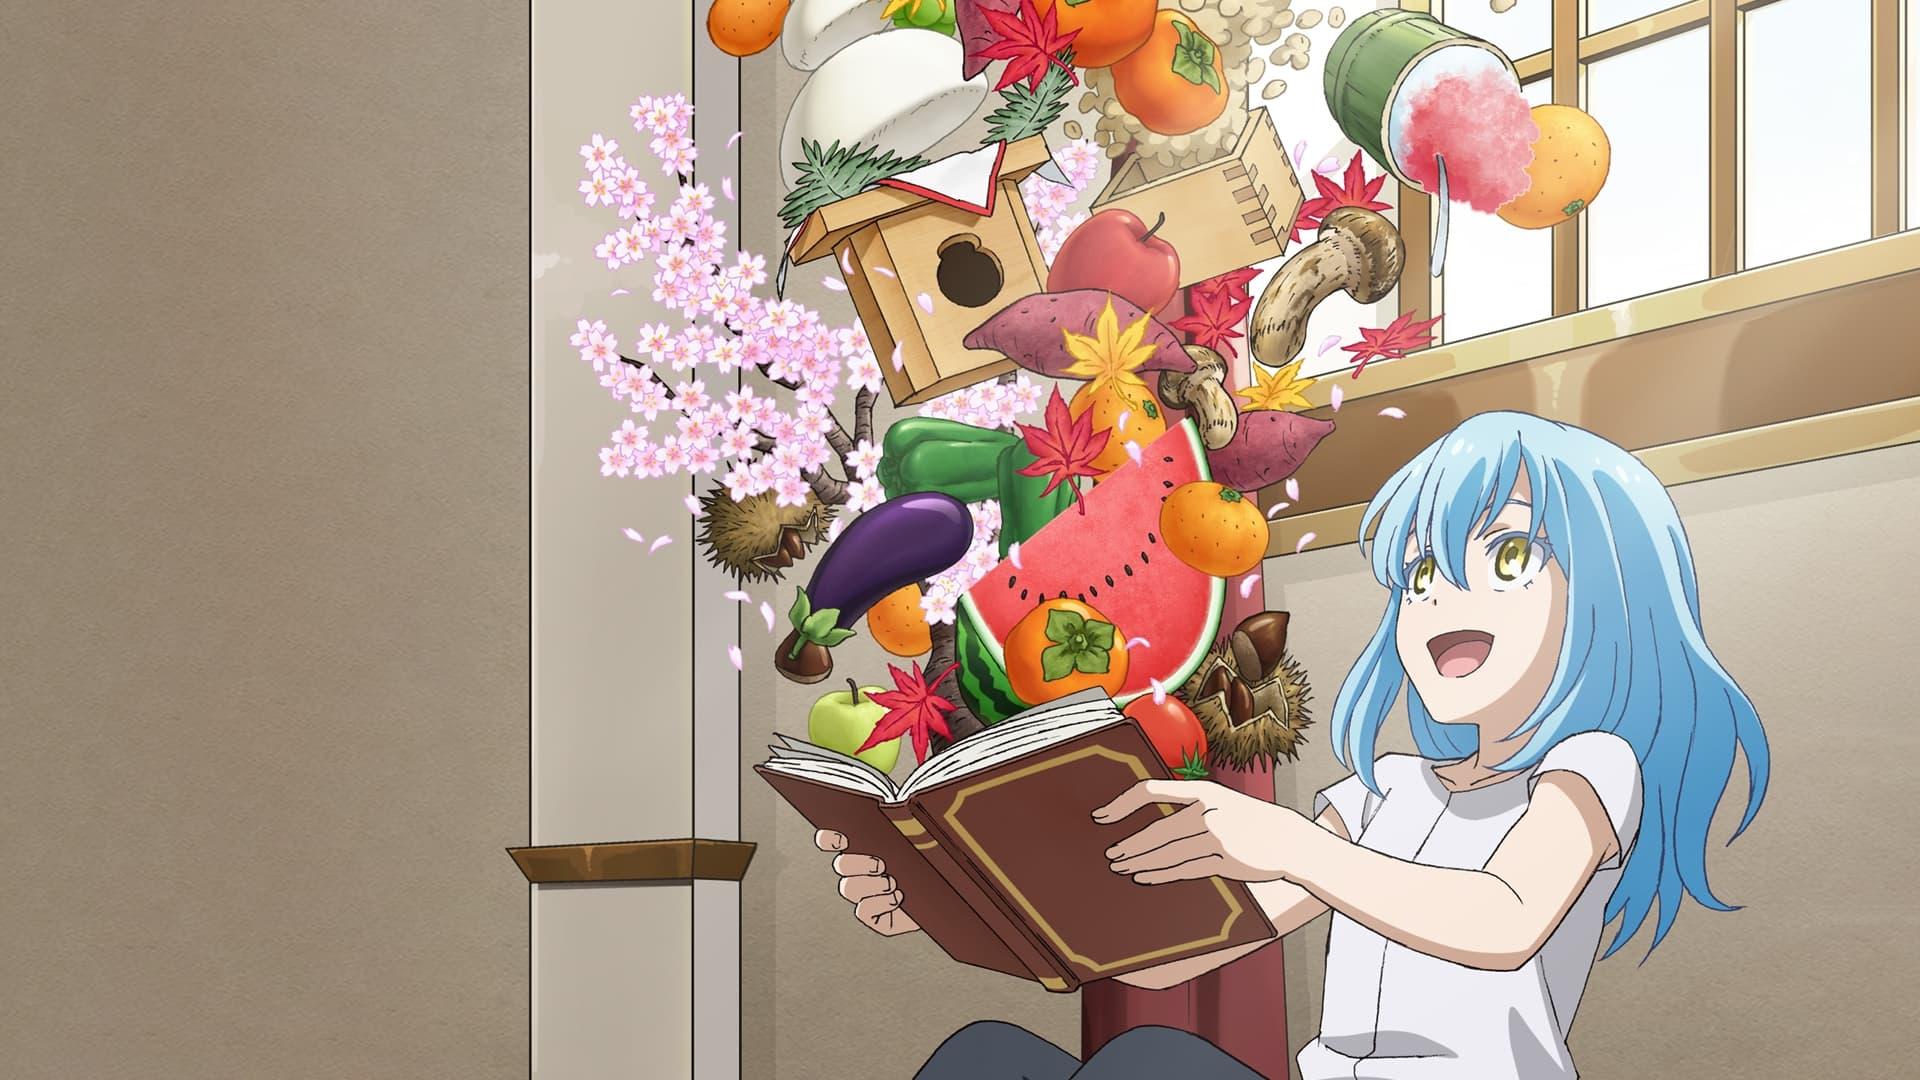 The Slime Diaries: That Time I Got Reincarnated as a Slime backdrop